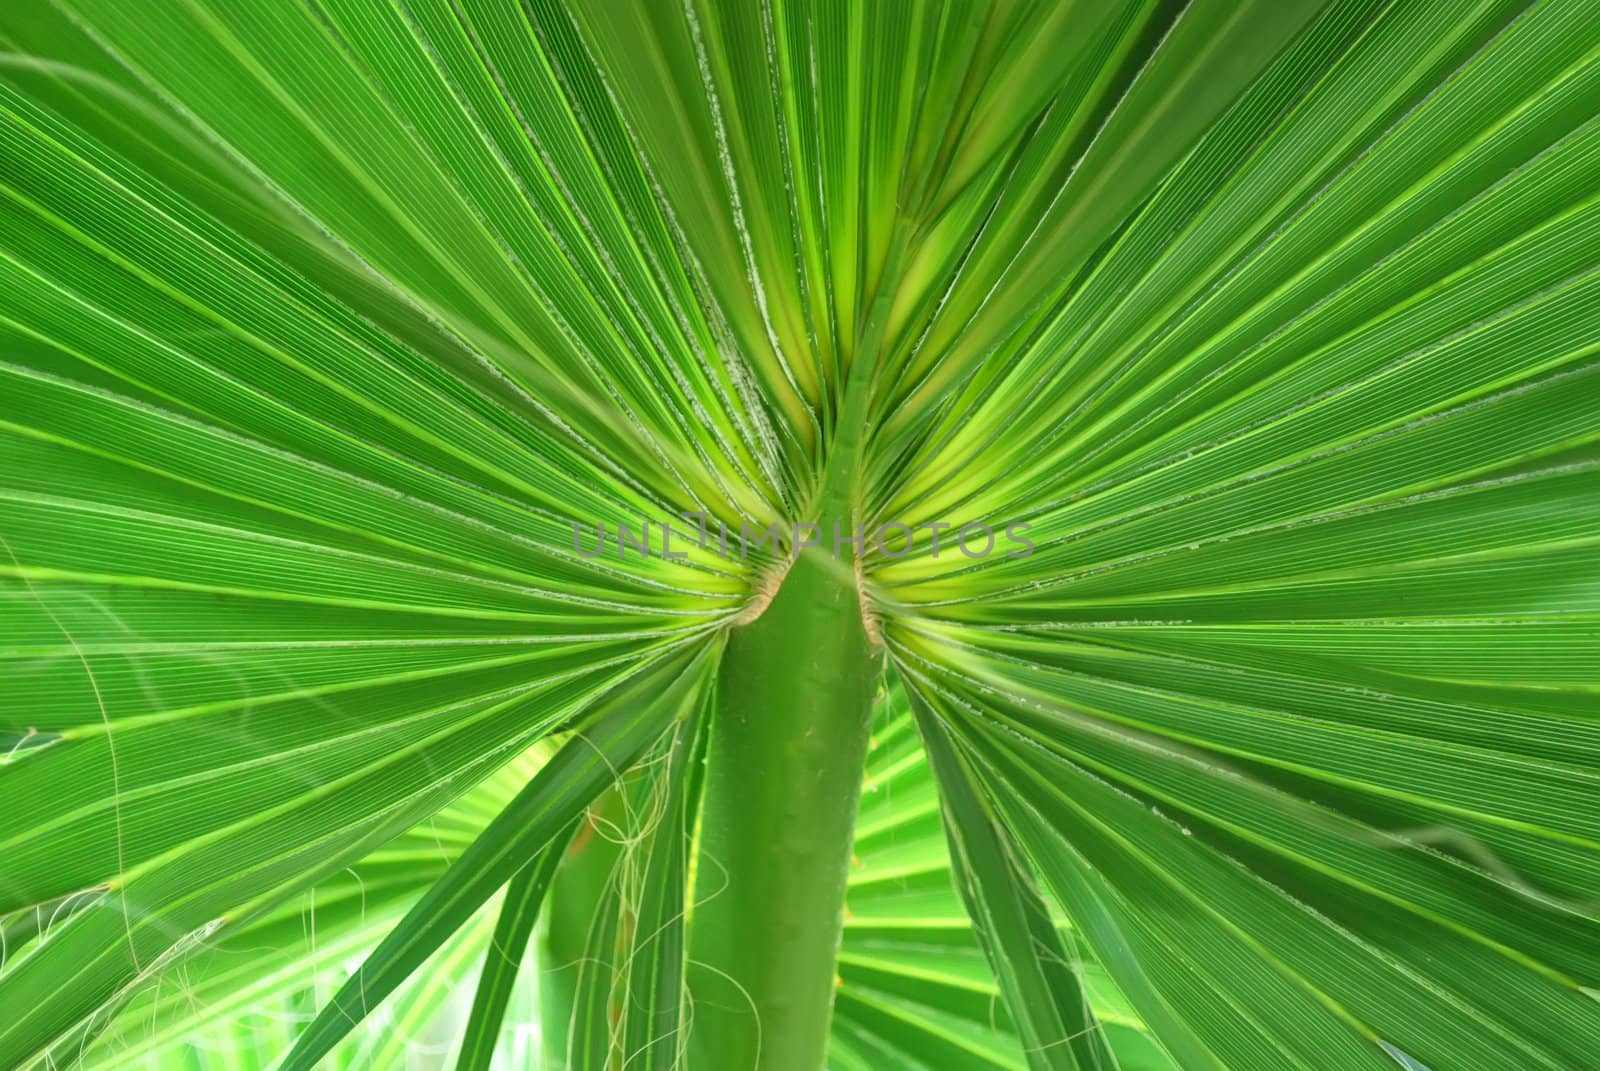 Green Exotic Tropical Leaf Close-up Texture (Background)